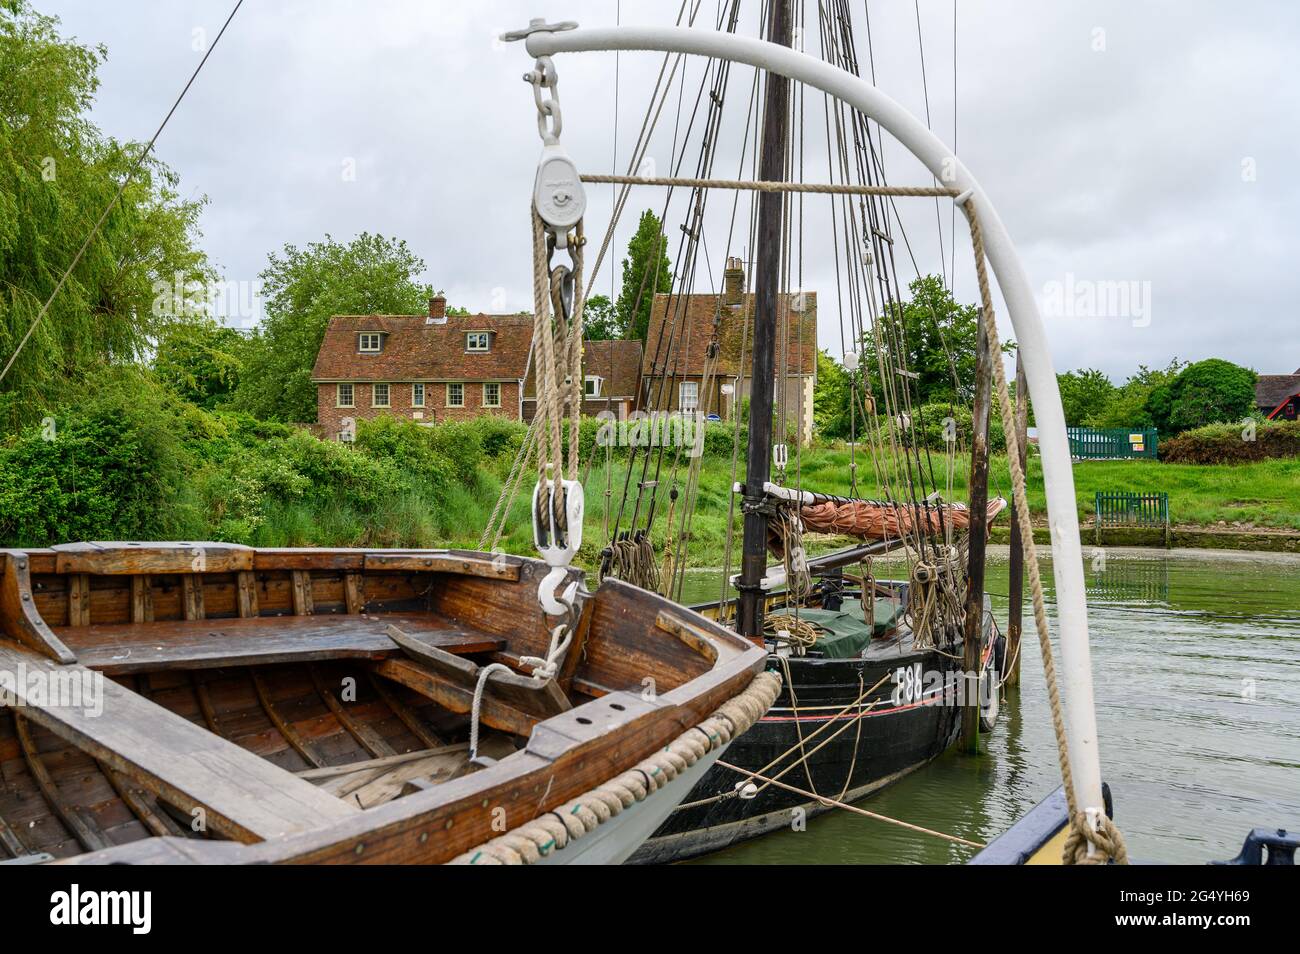 The dinghy of sailing barge 'Edith May' in the foreground with the Whitstable Oyster Smack Thistle F86 behind moored in Lower Halstow, Kent, England. Stock Photo